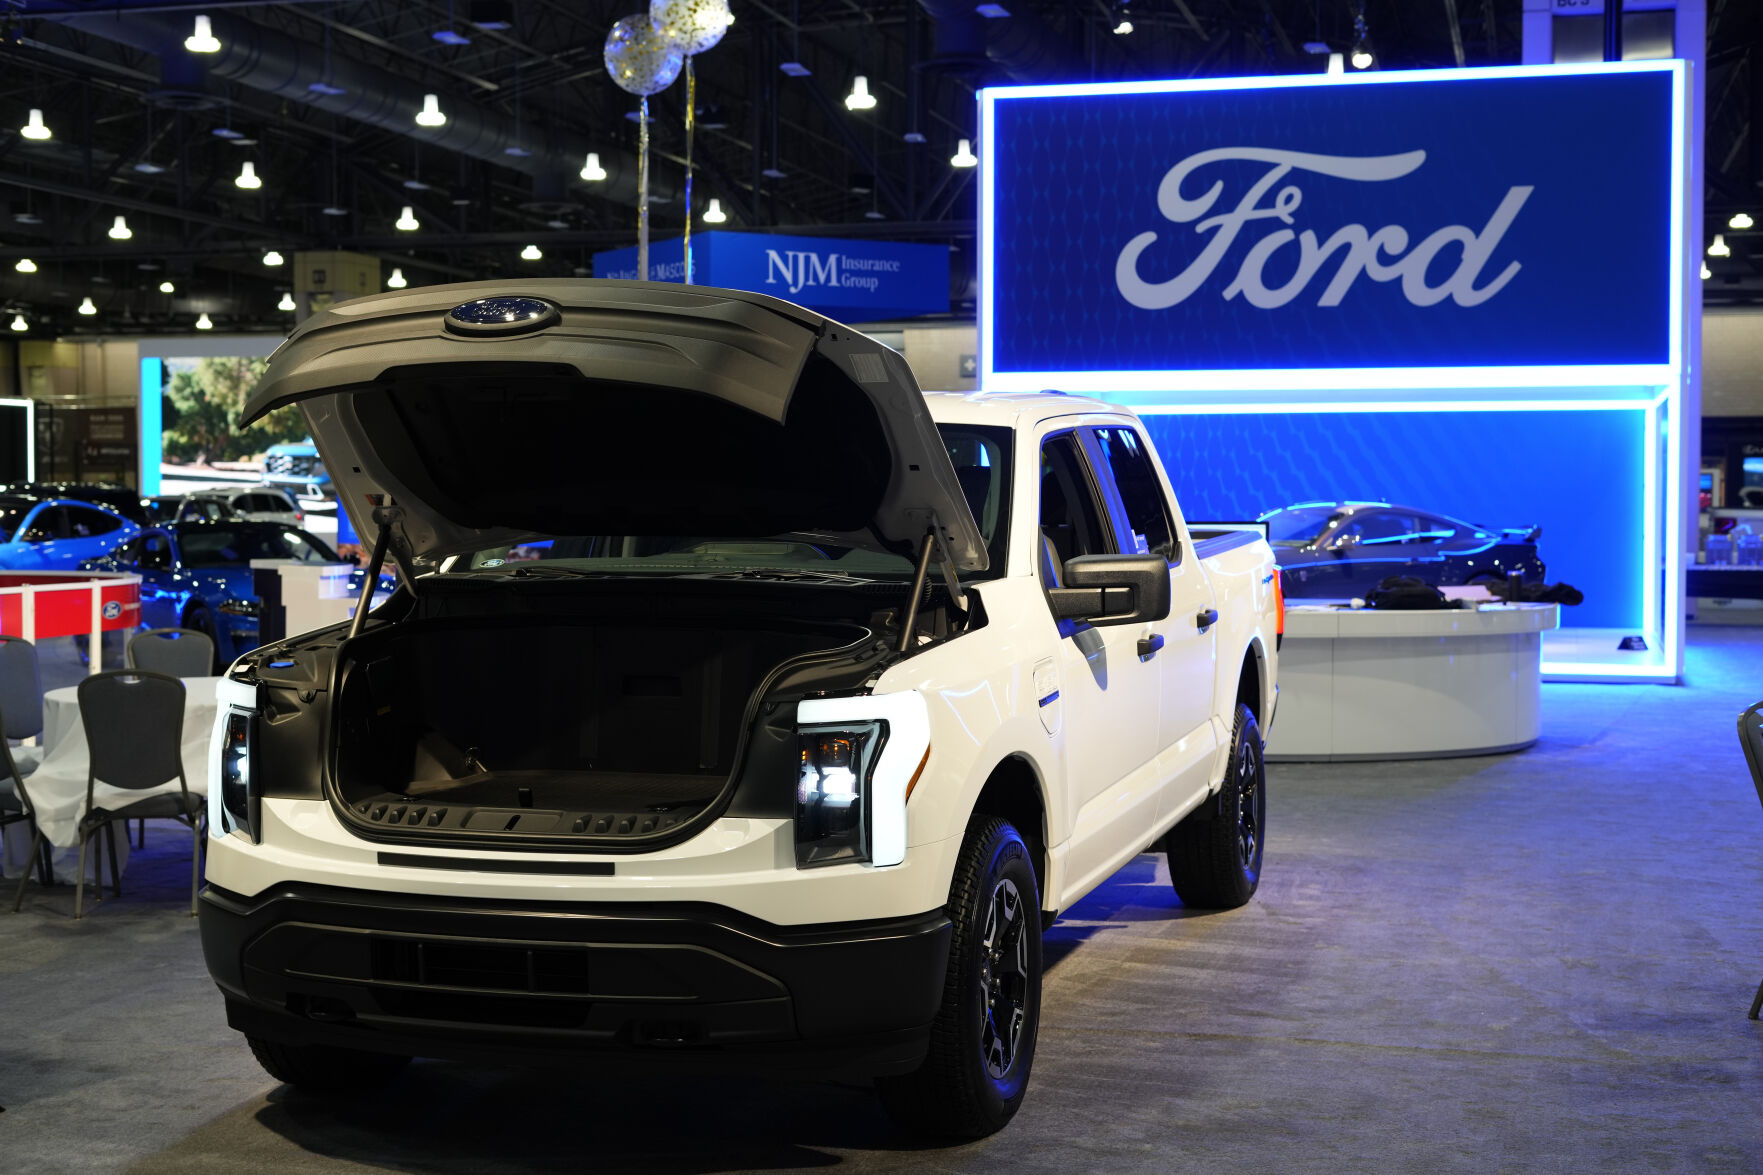 <p>FILE - The Ford F-150 Lightning displayed at the Philadelphia Auto Show, Jan. 27, 2023, in Philadelphia. Ford Motor Co. says it has suspended production and halted shipments of the F-150 Lightning electric pickup after a battery caught fire during a pre-delivery quality check. On Wednesday, Feb. 15, the automaker said in a statement it has no reason to believe electric pickups already in use by customers are affected by the battery issue.(AP Photo/Matt Rourke, File)</p>   PHOTO CREDIT: Matt Rourke - staff, AP